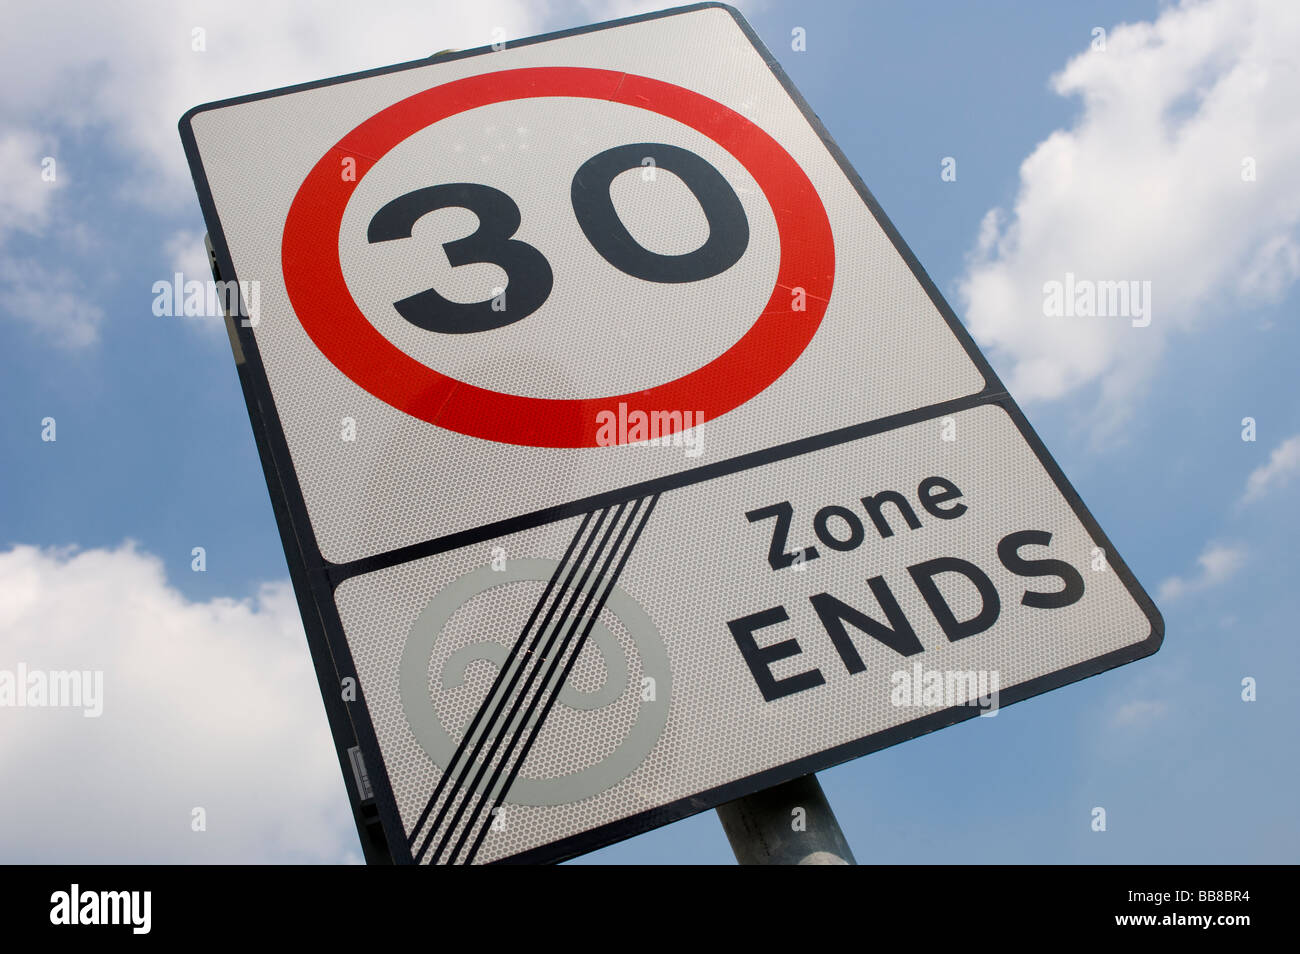 Road sign showing that traffic is leaving a 20 mph zone and the speed limit is now 30 mph in a town in England Stock Photo